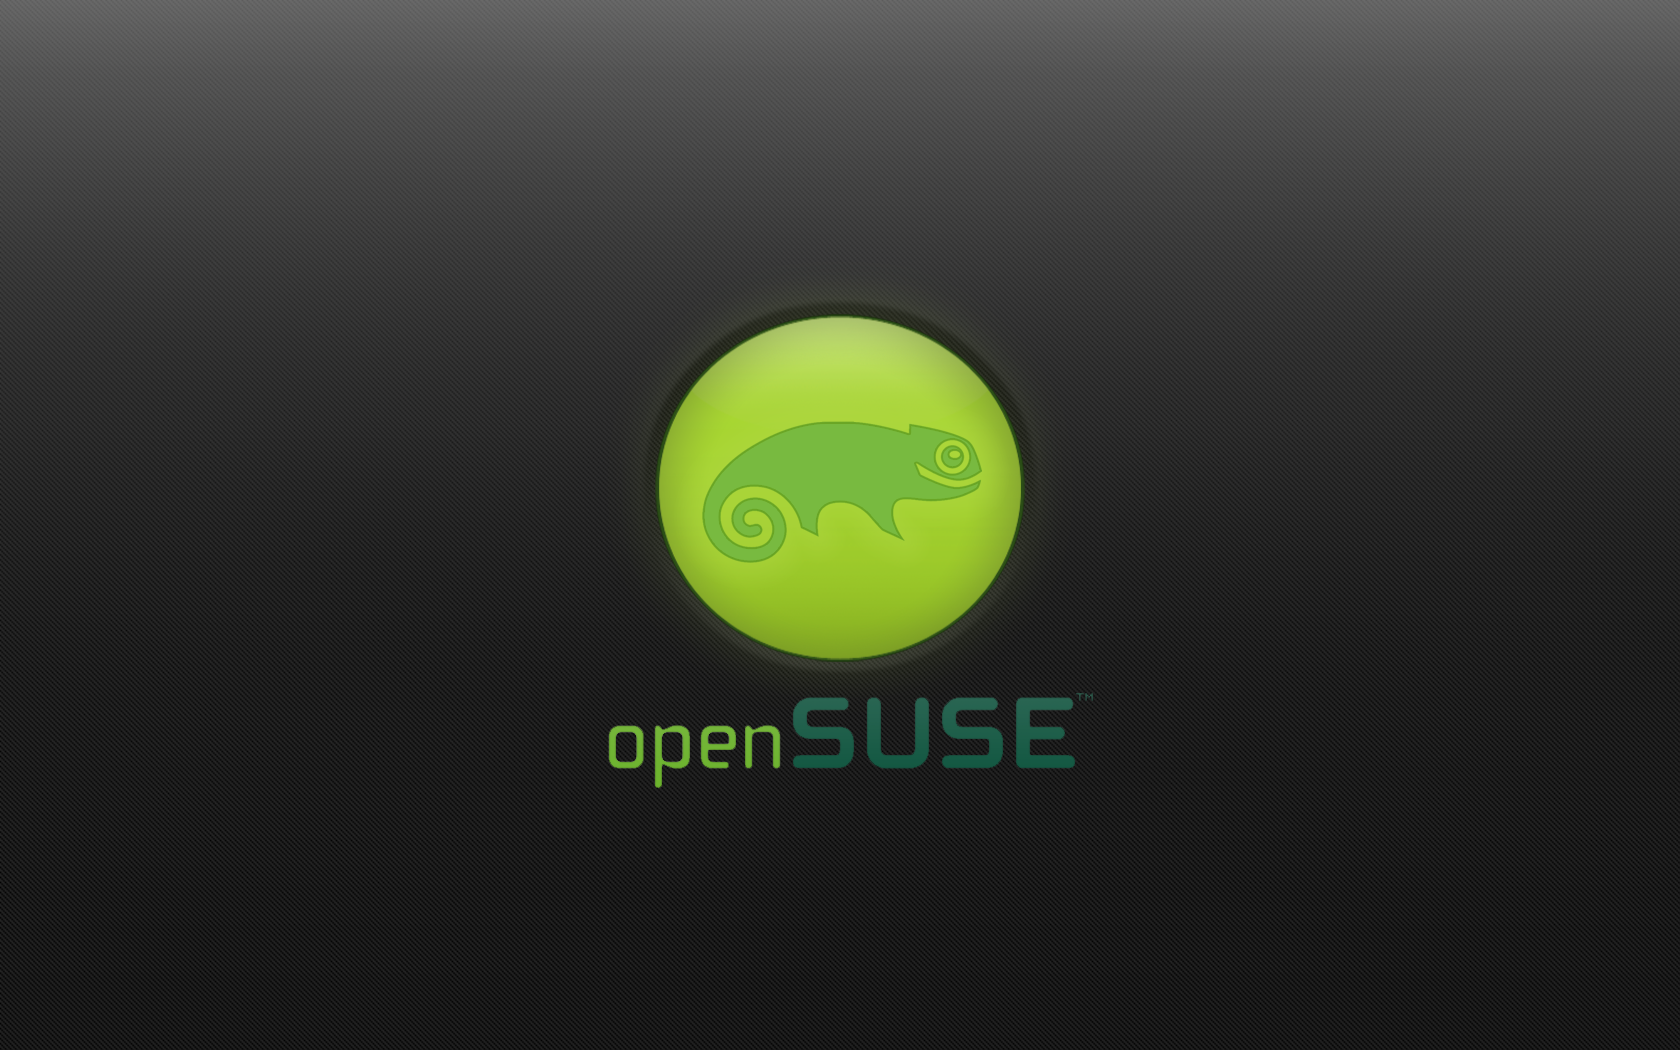 open_suse_wallpaper_by_strapaulo